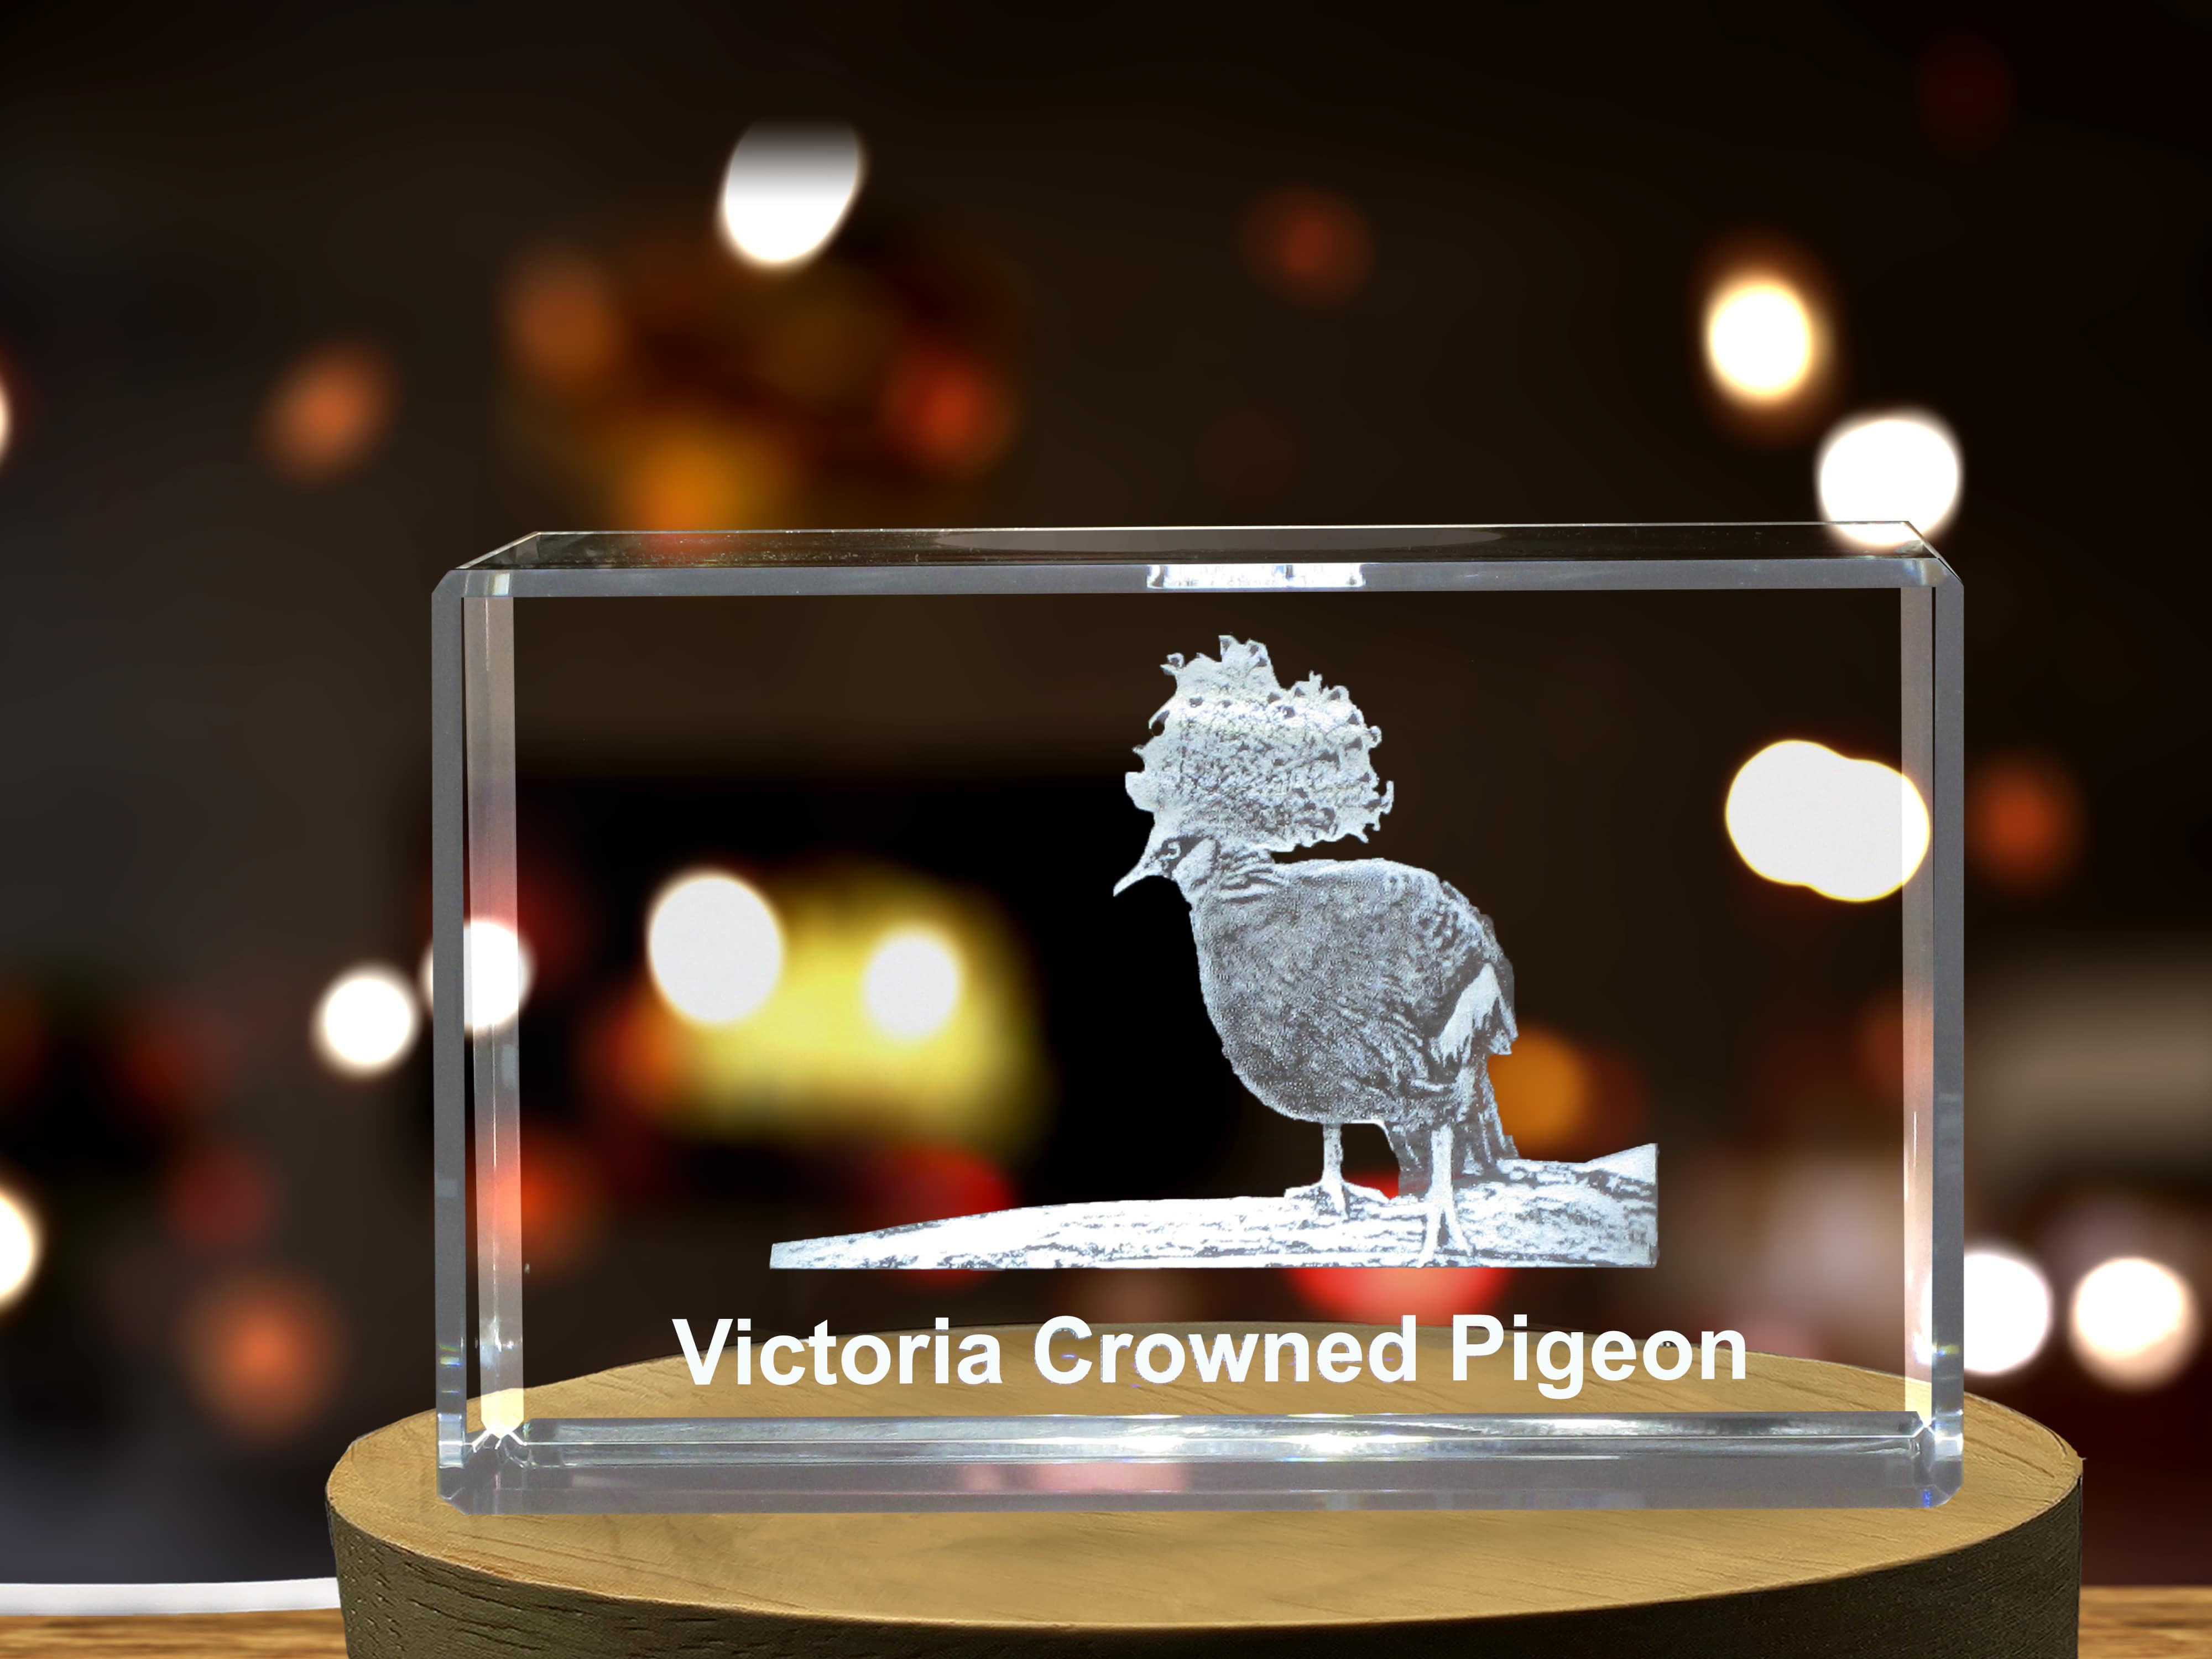 Victoria Crowned Pigeon 3D Engraved Crystal 3D Engraved Crystal Keepsake/Gift/Decor/Collectible/Souvenir A&B Crystal Collection